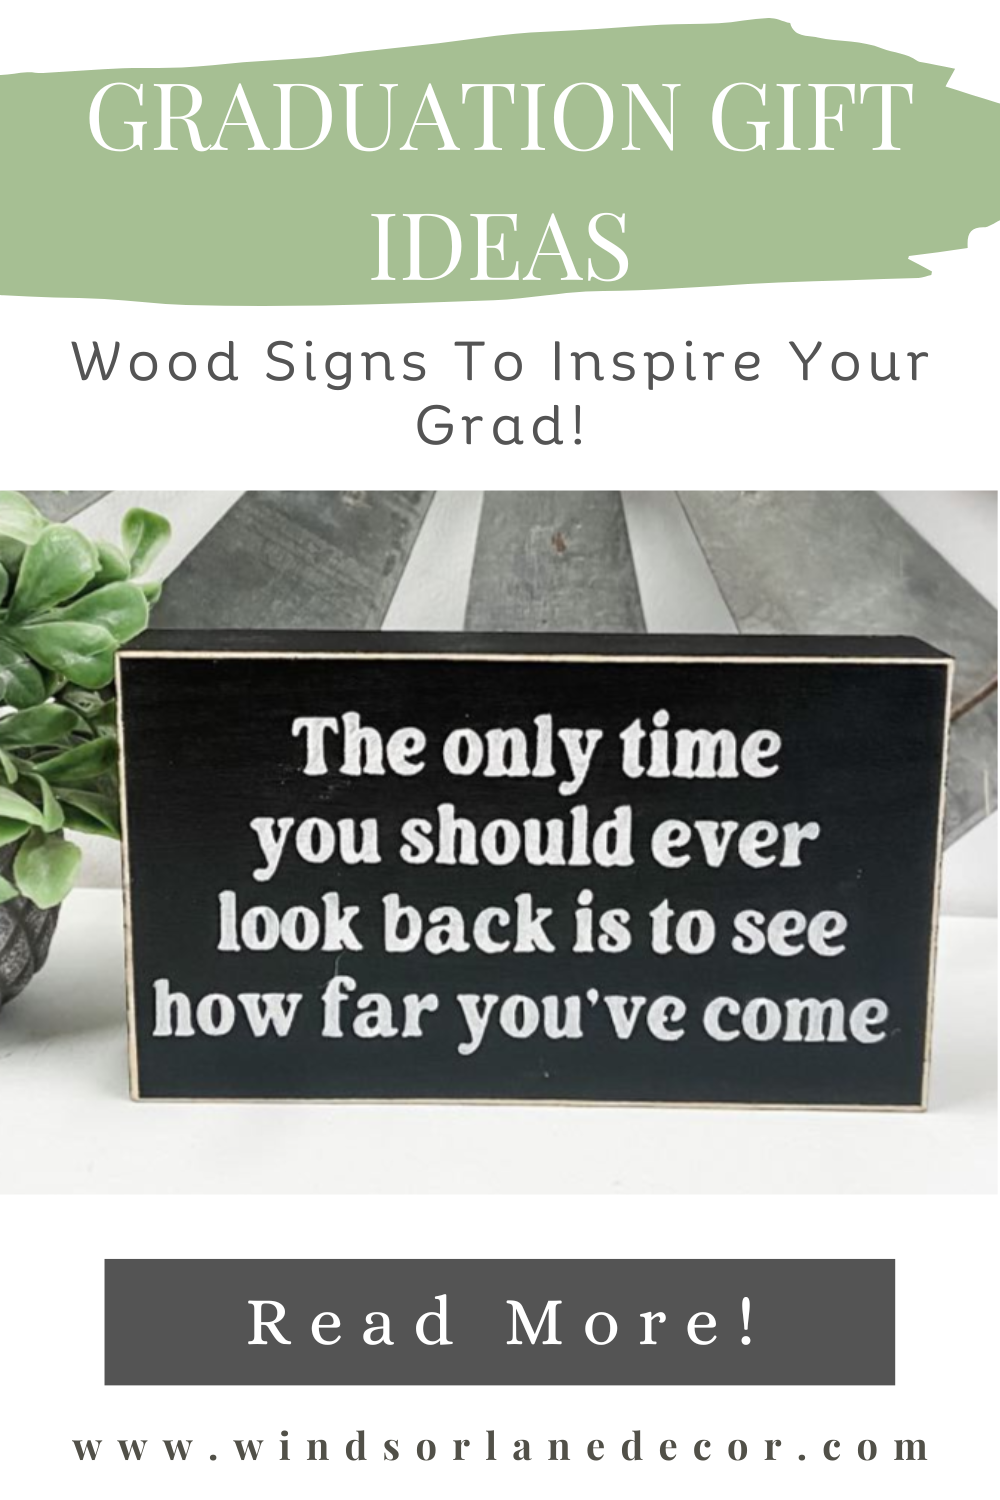 Graduation Gift Ideas: Inspire Your Grad with These Handmade Wood Signs